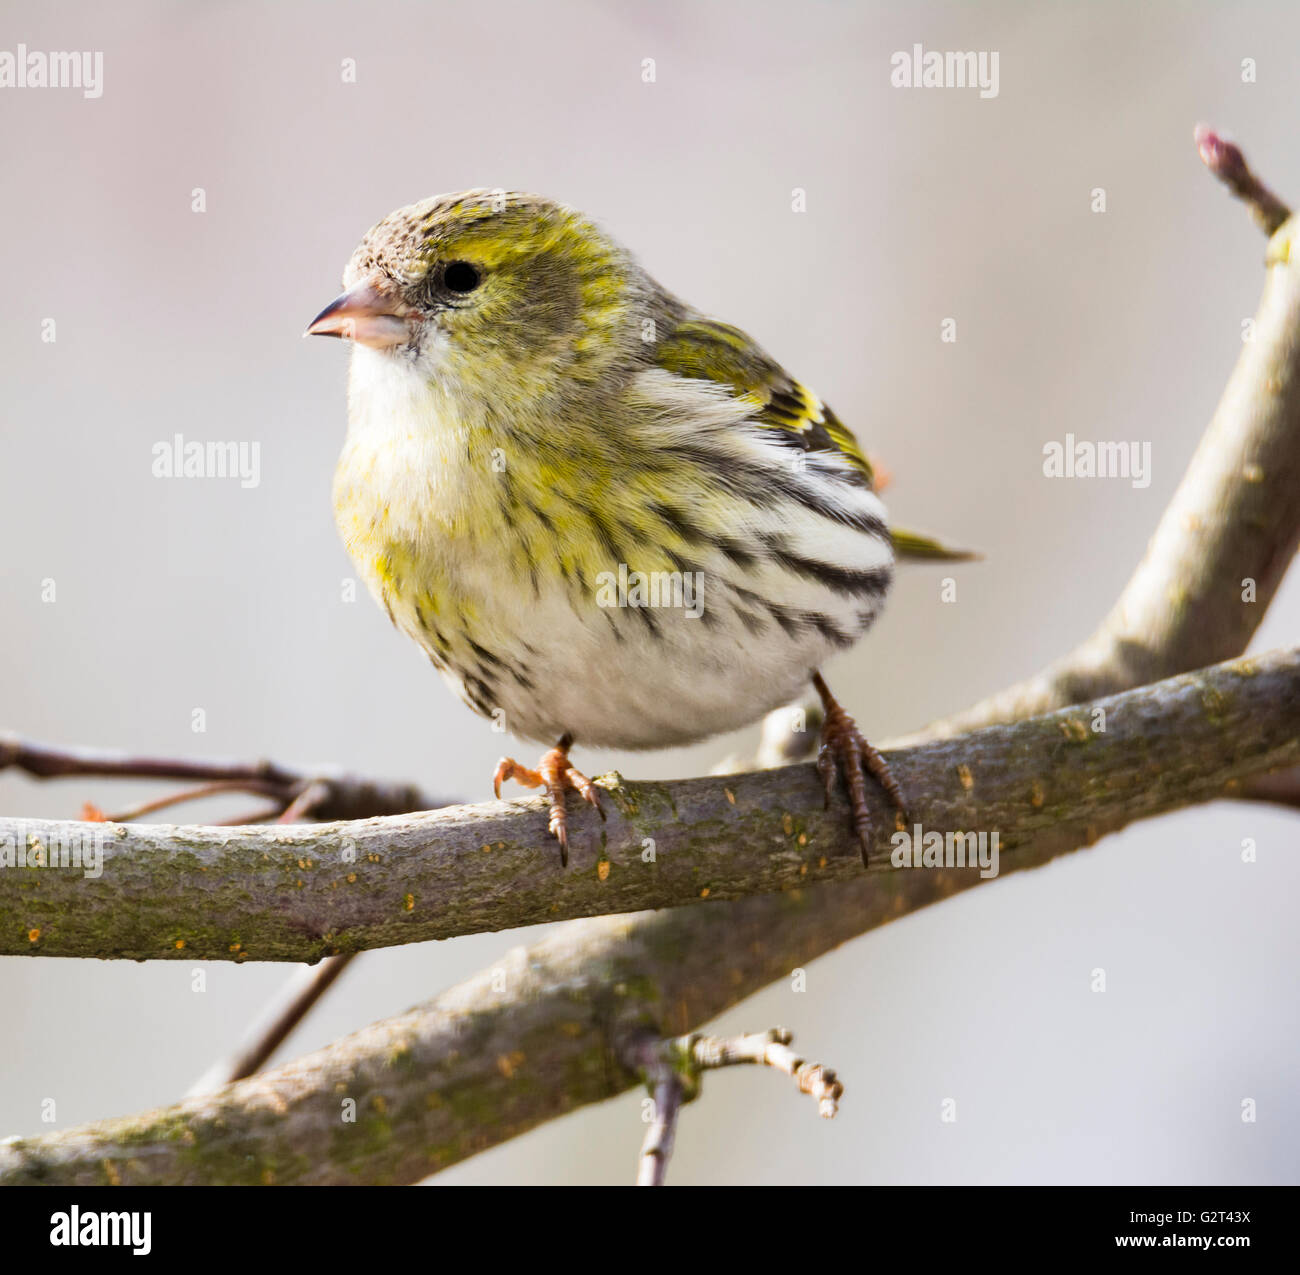 Female black-headed goldfinch (Carduelis spinus) sitting on the branch of a tree Stock Photo